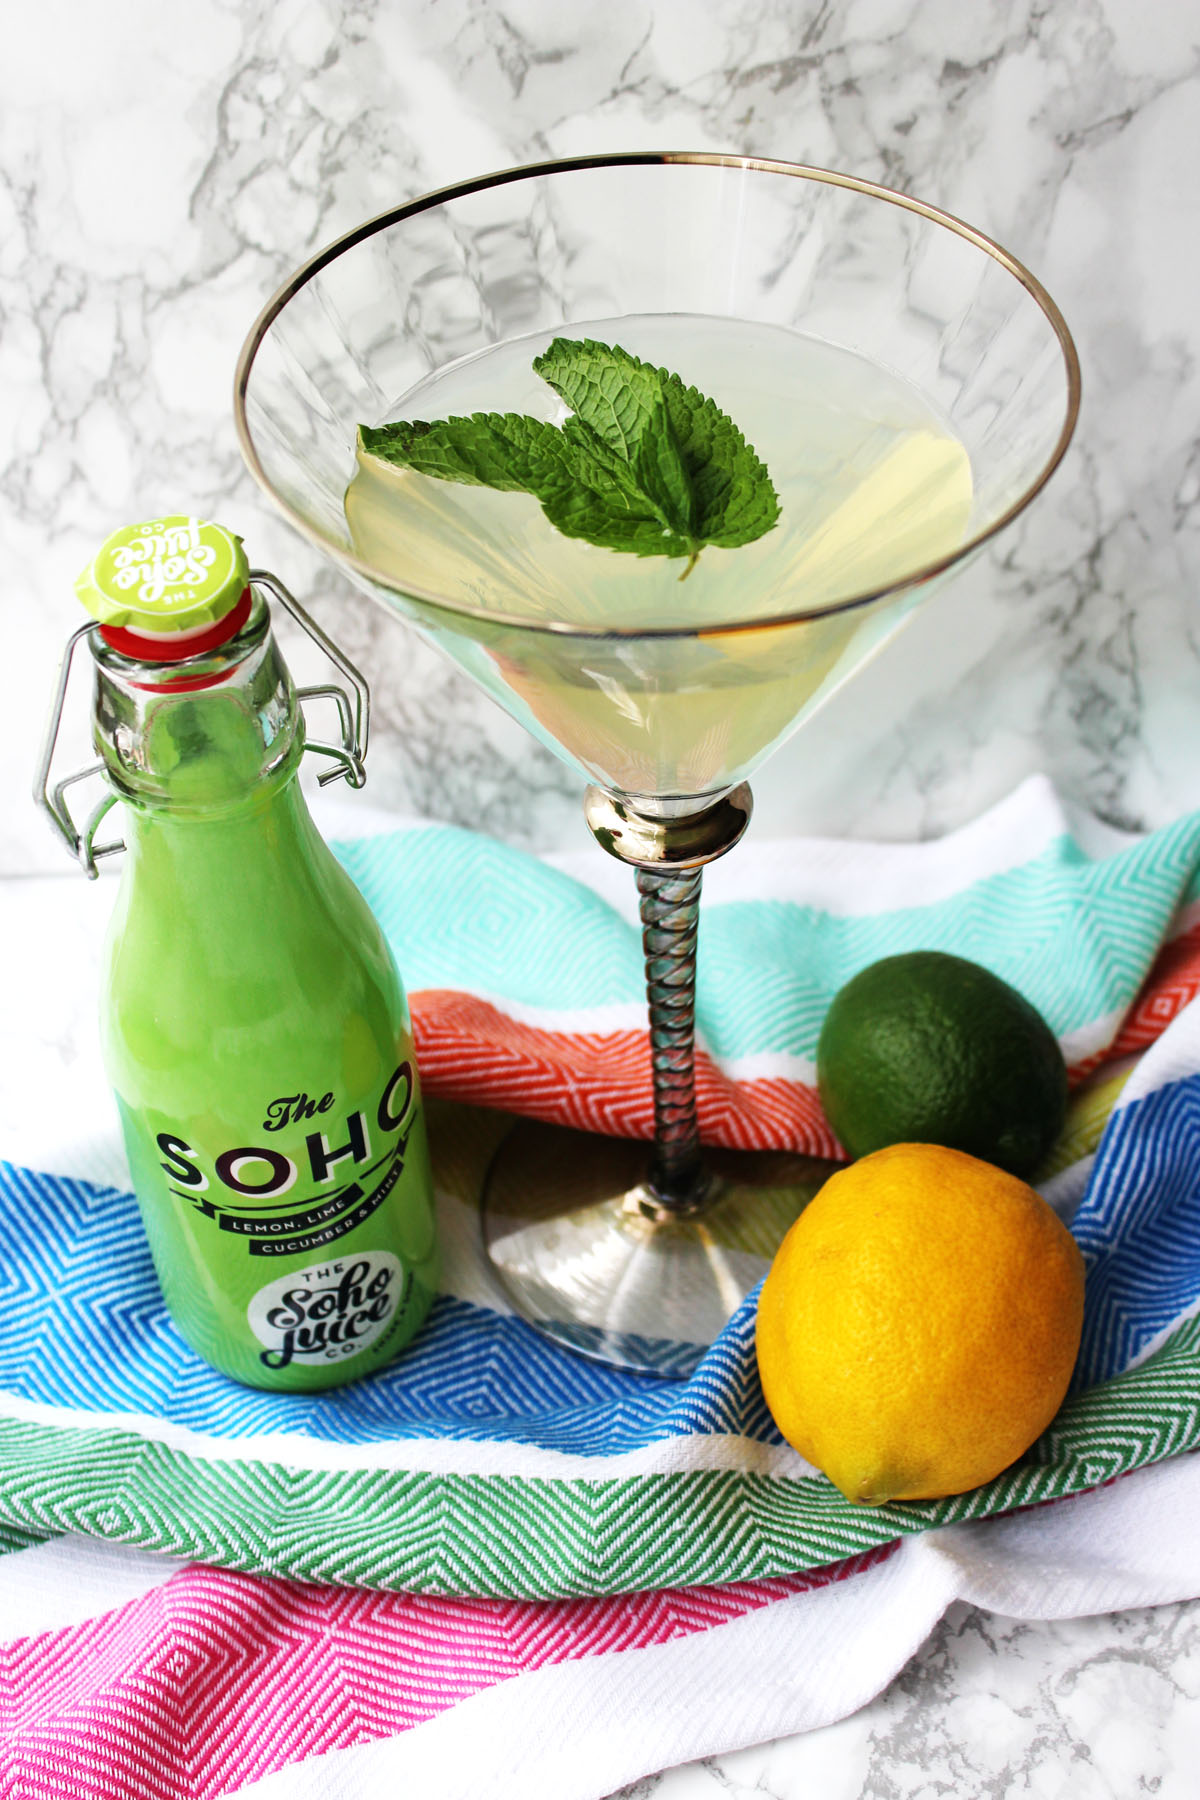 Check out the Soho Martini made with a cucumber mint and citrus fruit soft drink from the Soho Juice Co